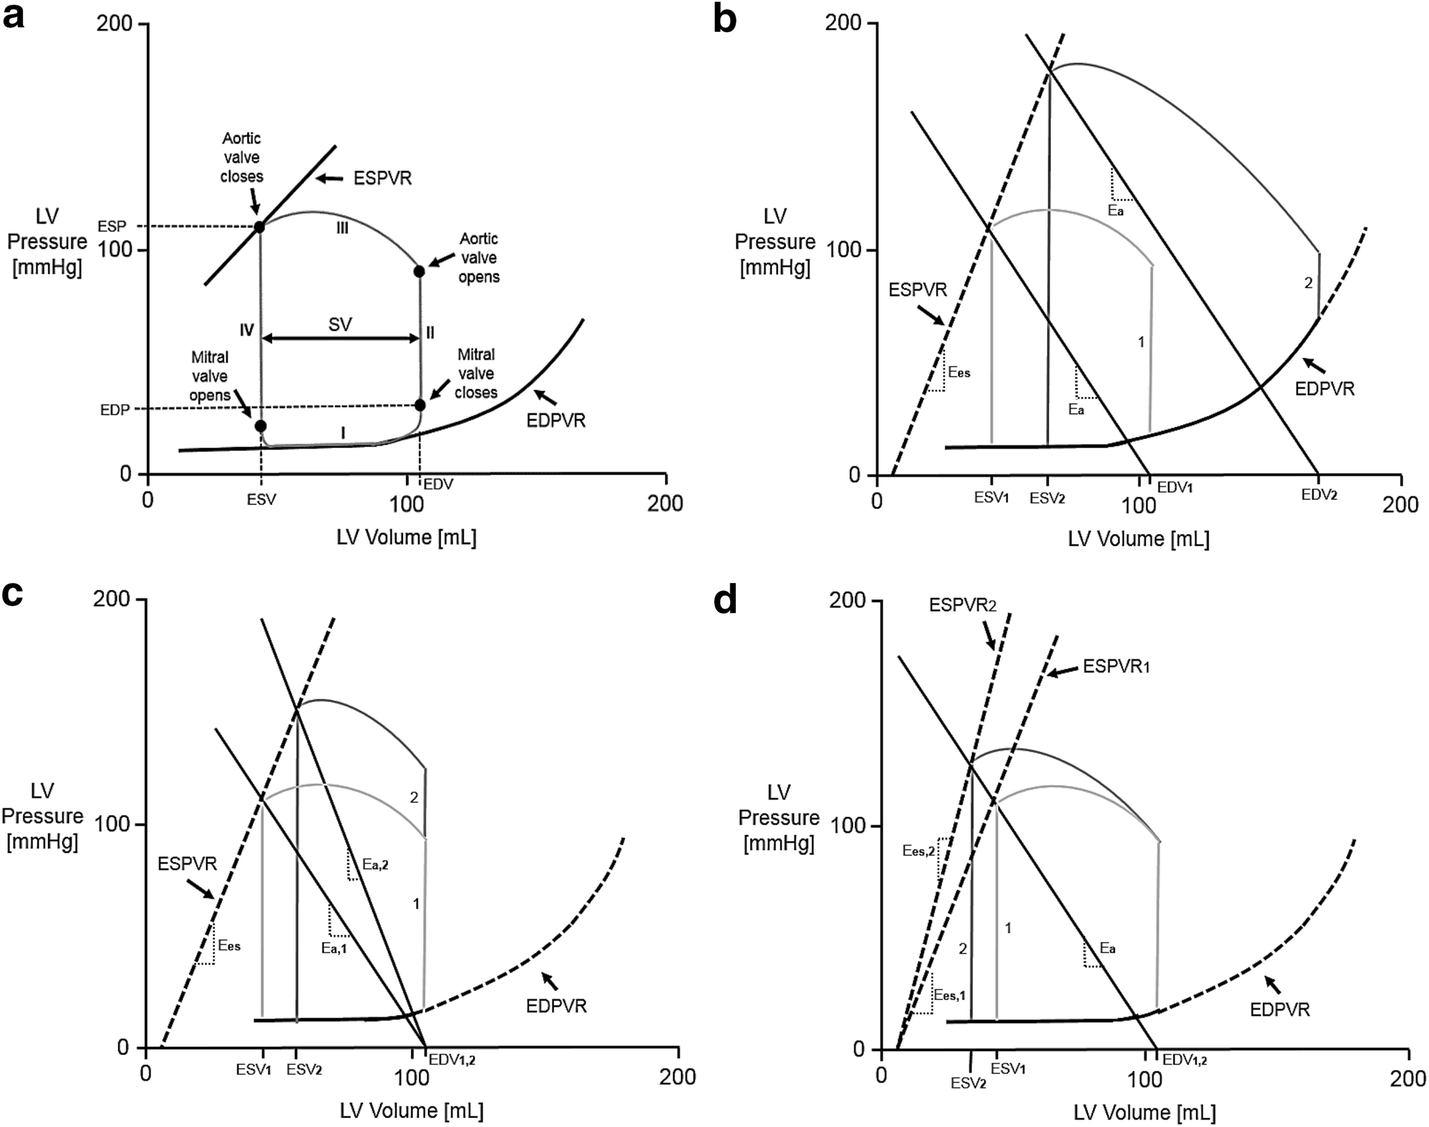 Finite state machine implementation for left ventricle modeling and control  | BioMedical Engineering OnLine | Full Text